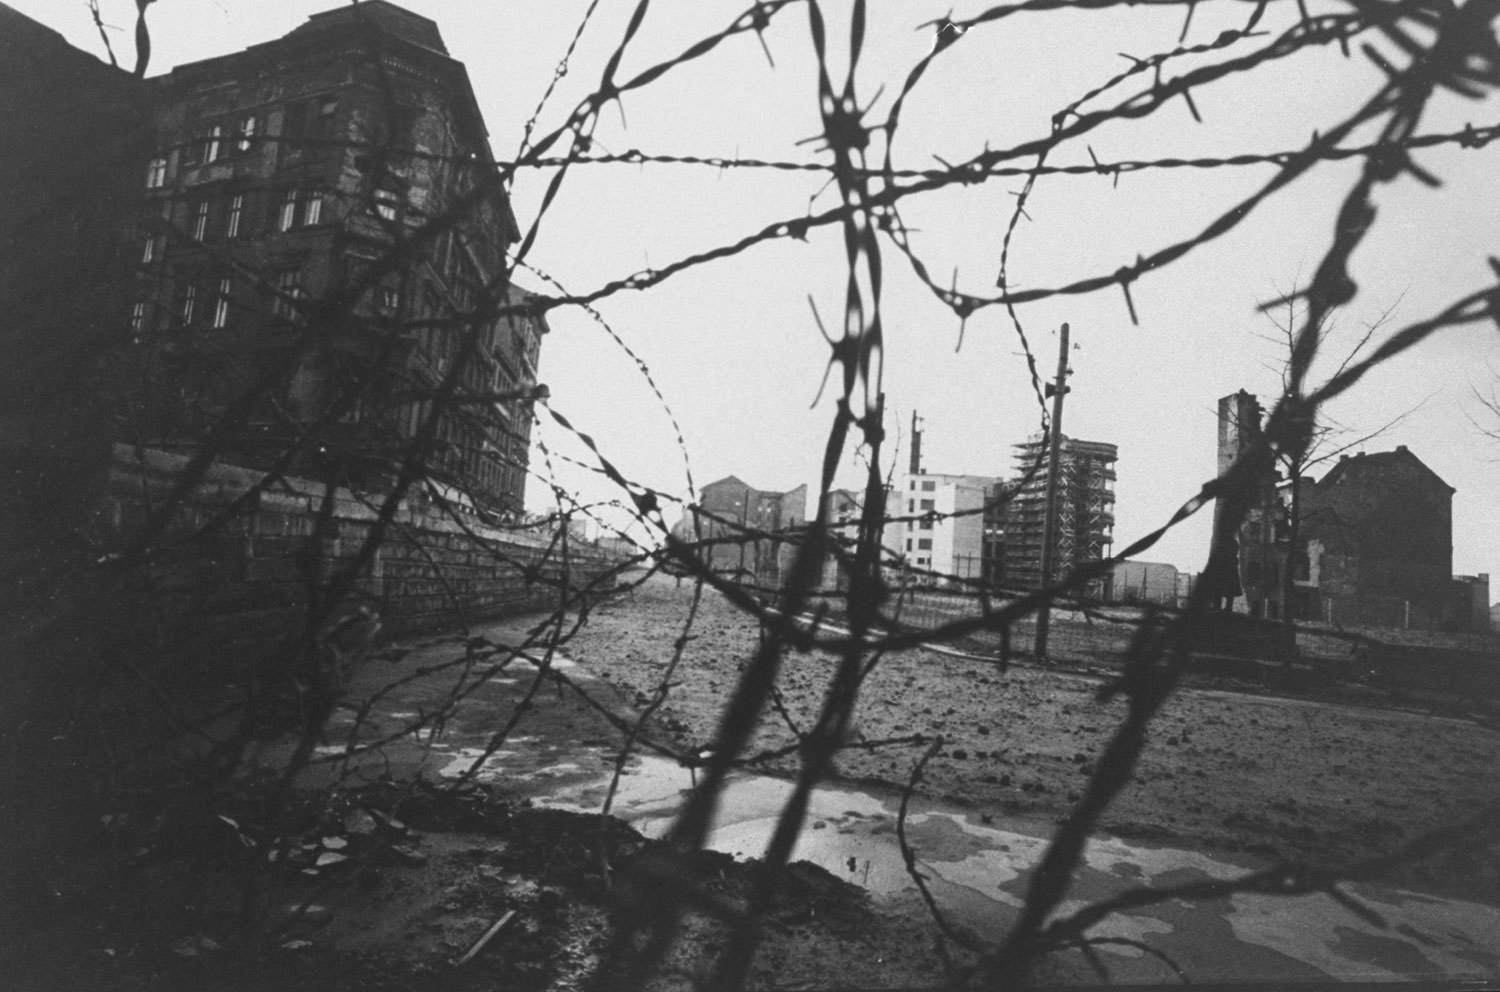 A divided Berlin, seen through a tangle of barbed wire in December 1962.